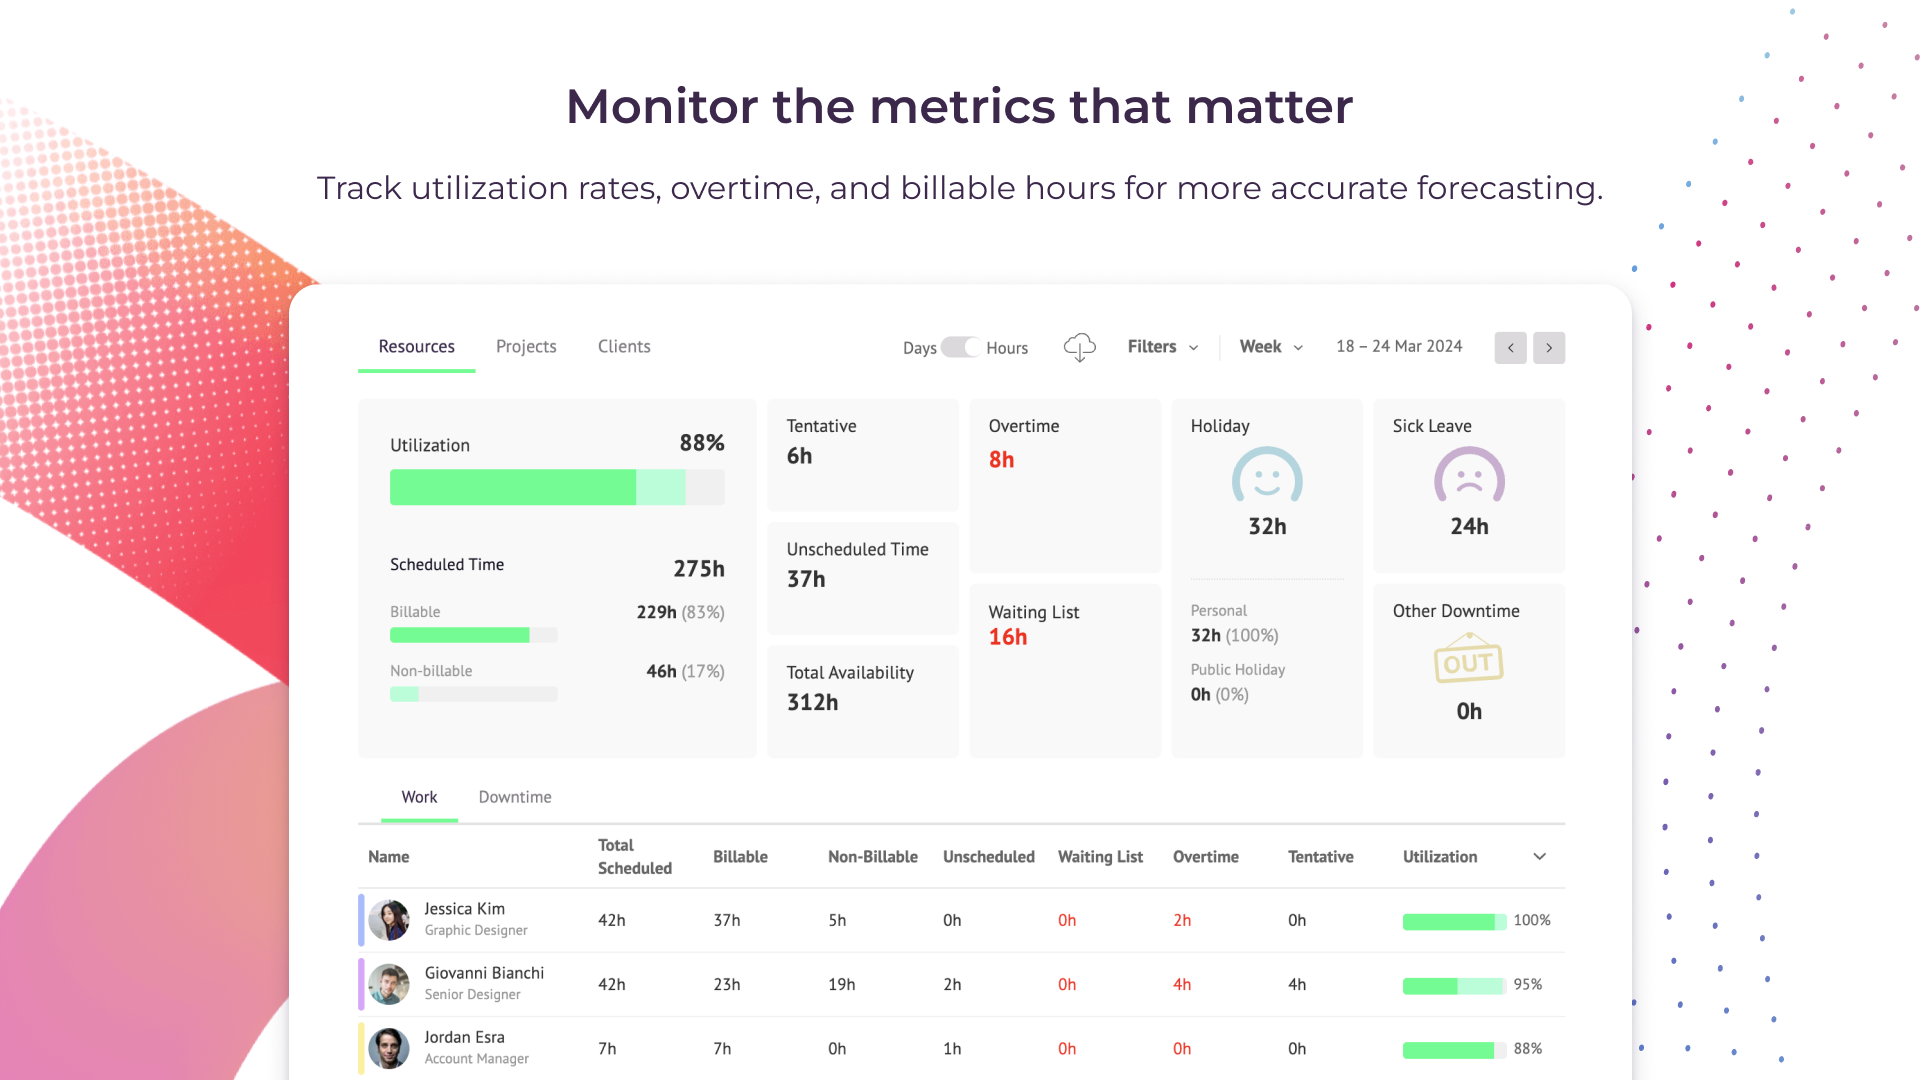 Monitor the metrics that matter. Track utilization rates, overtime, and billable hours for more accurate forecasting.